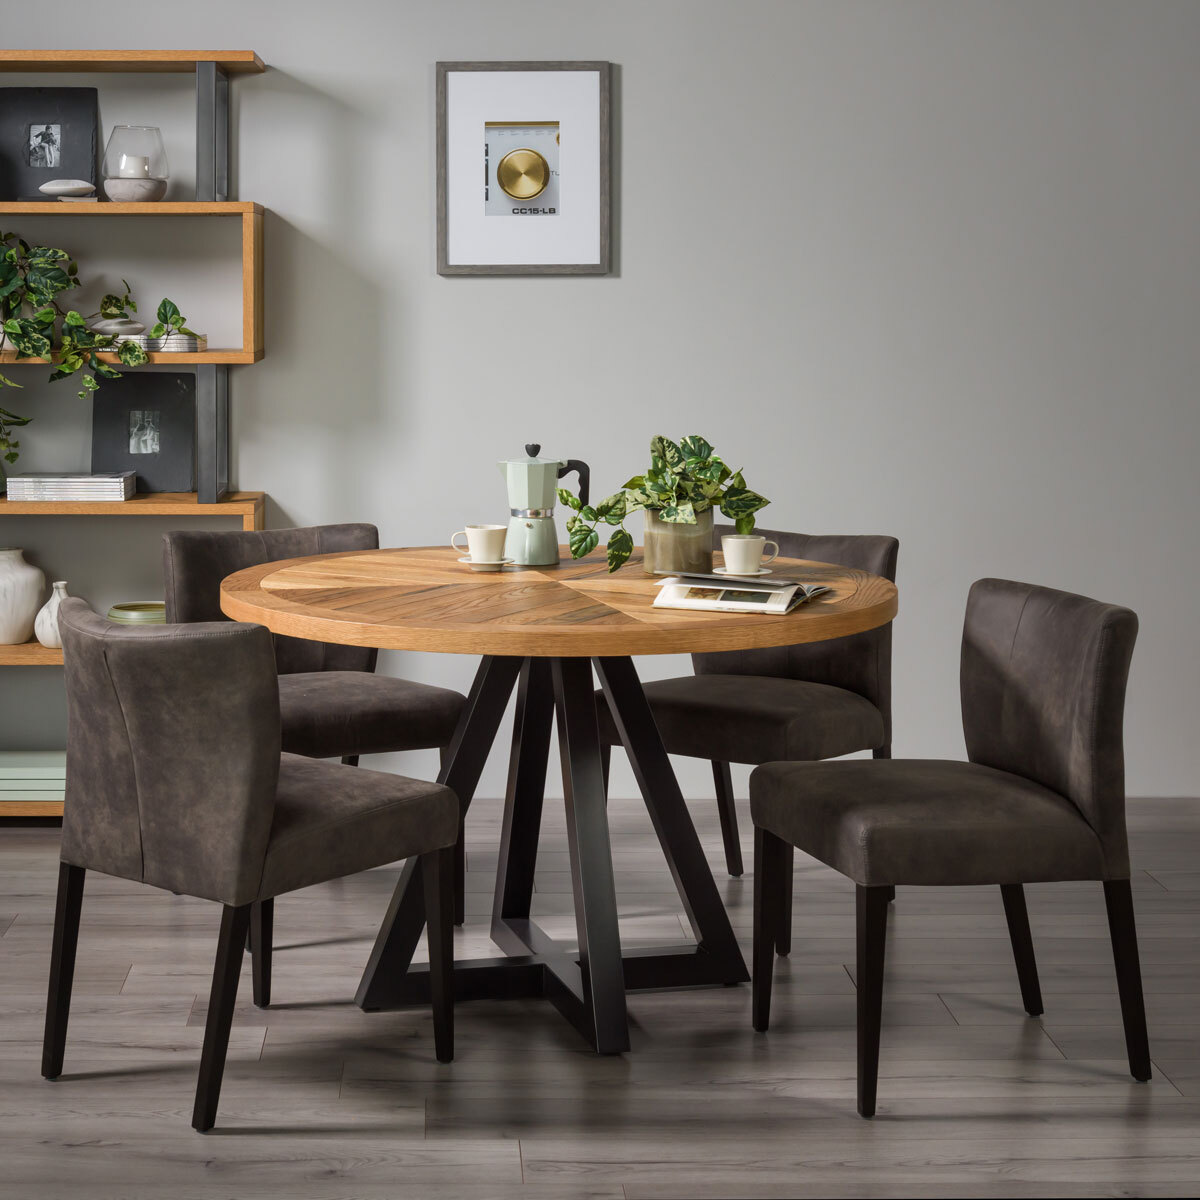 Chevron Rustic Oak Round Dining Table, Round Dining Table Set For 4 Uk